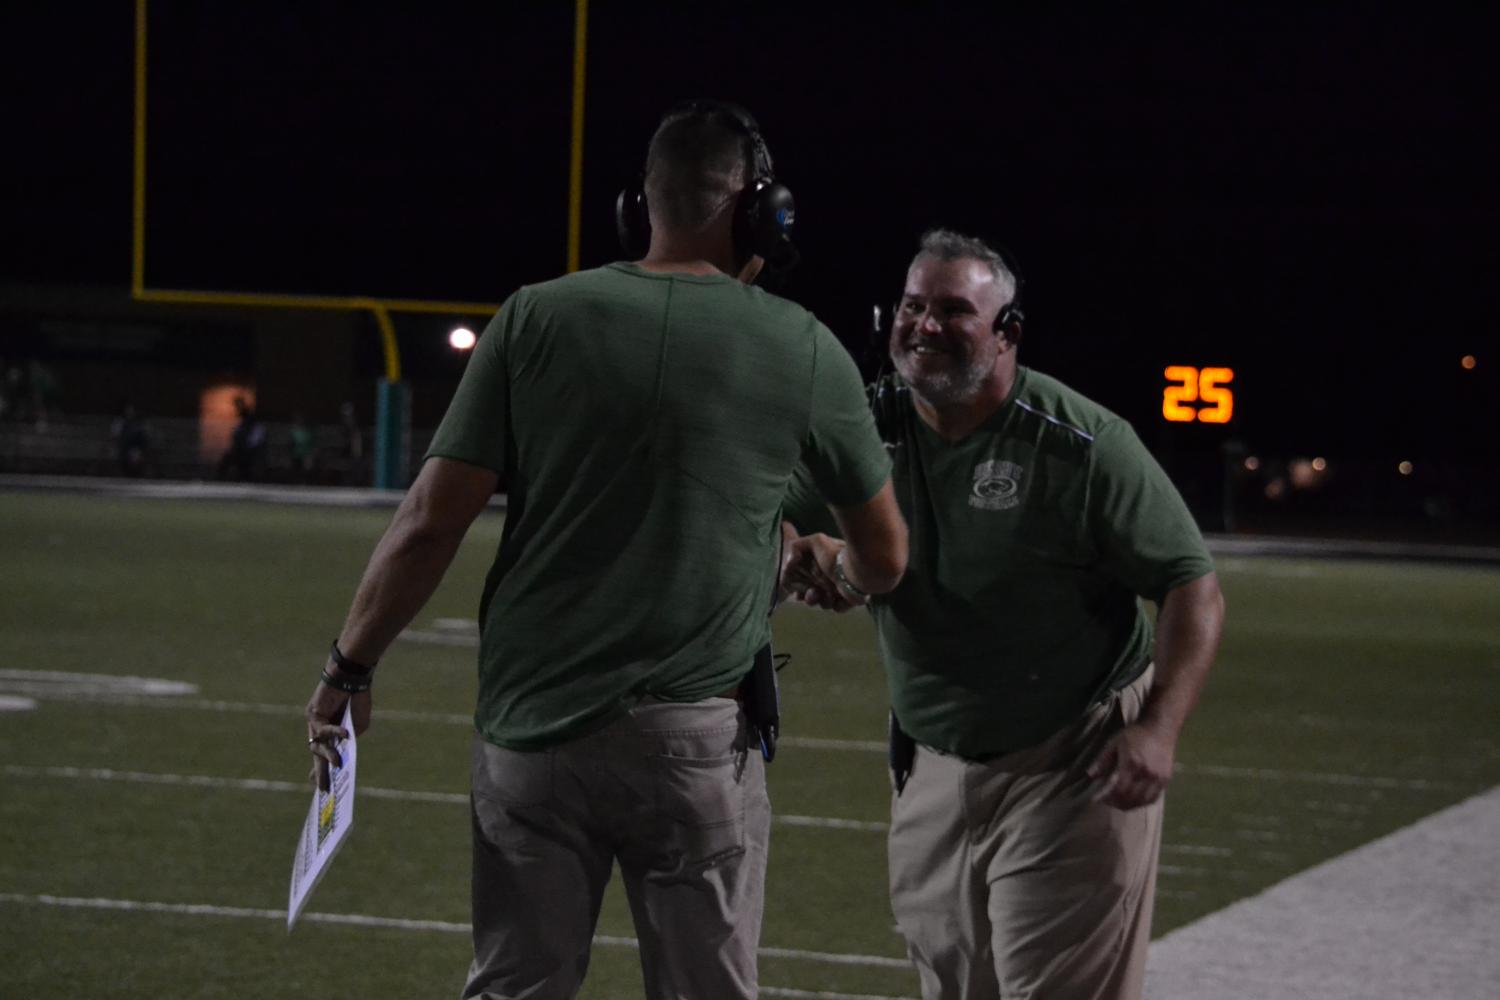 Coaches+of+Derby+football+photo+gallery+%28Photos+by+Kaitlyn+Sanders%29